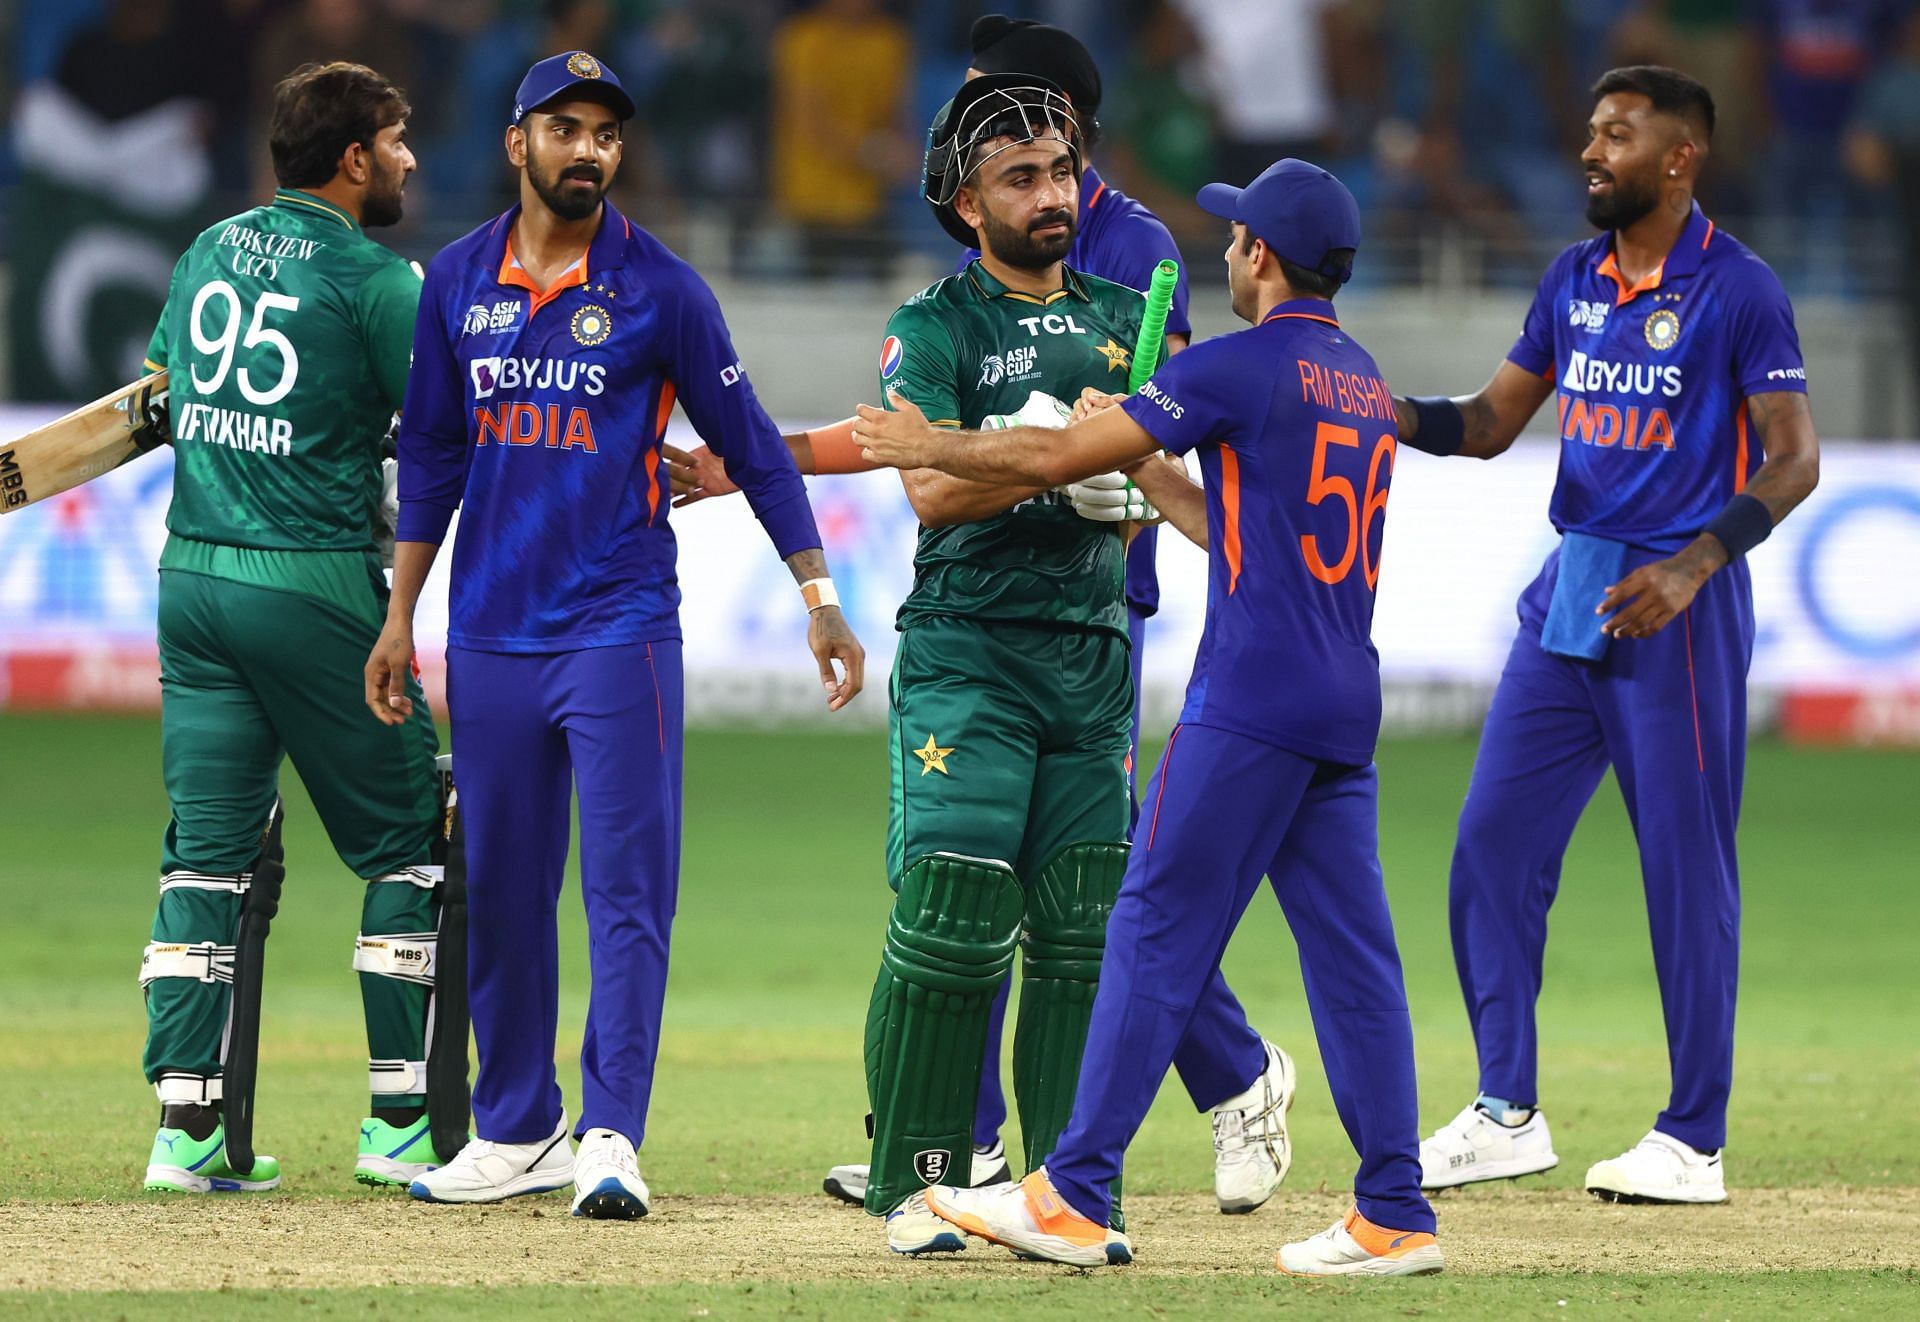 The India v Pakistan Asia Cup match saw a record 1.4 million tweets, only surpassed by the 1.5 million tweets when Virat Kohli scored his 71st international century